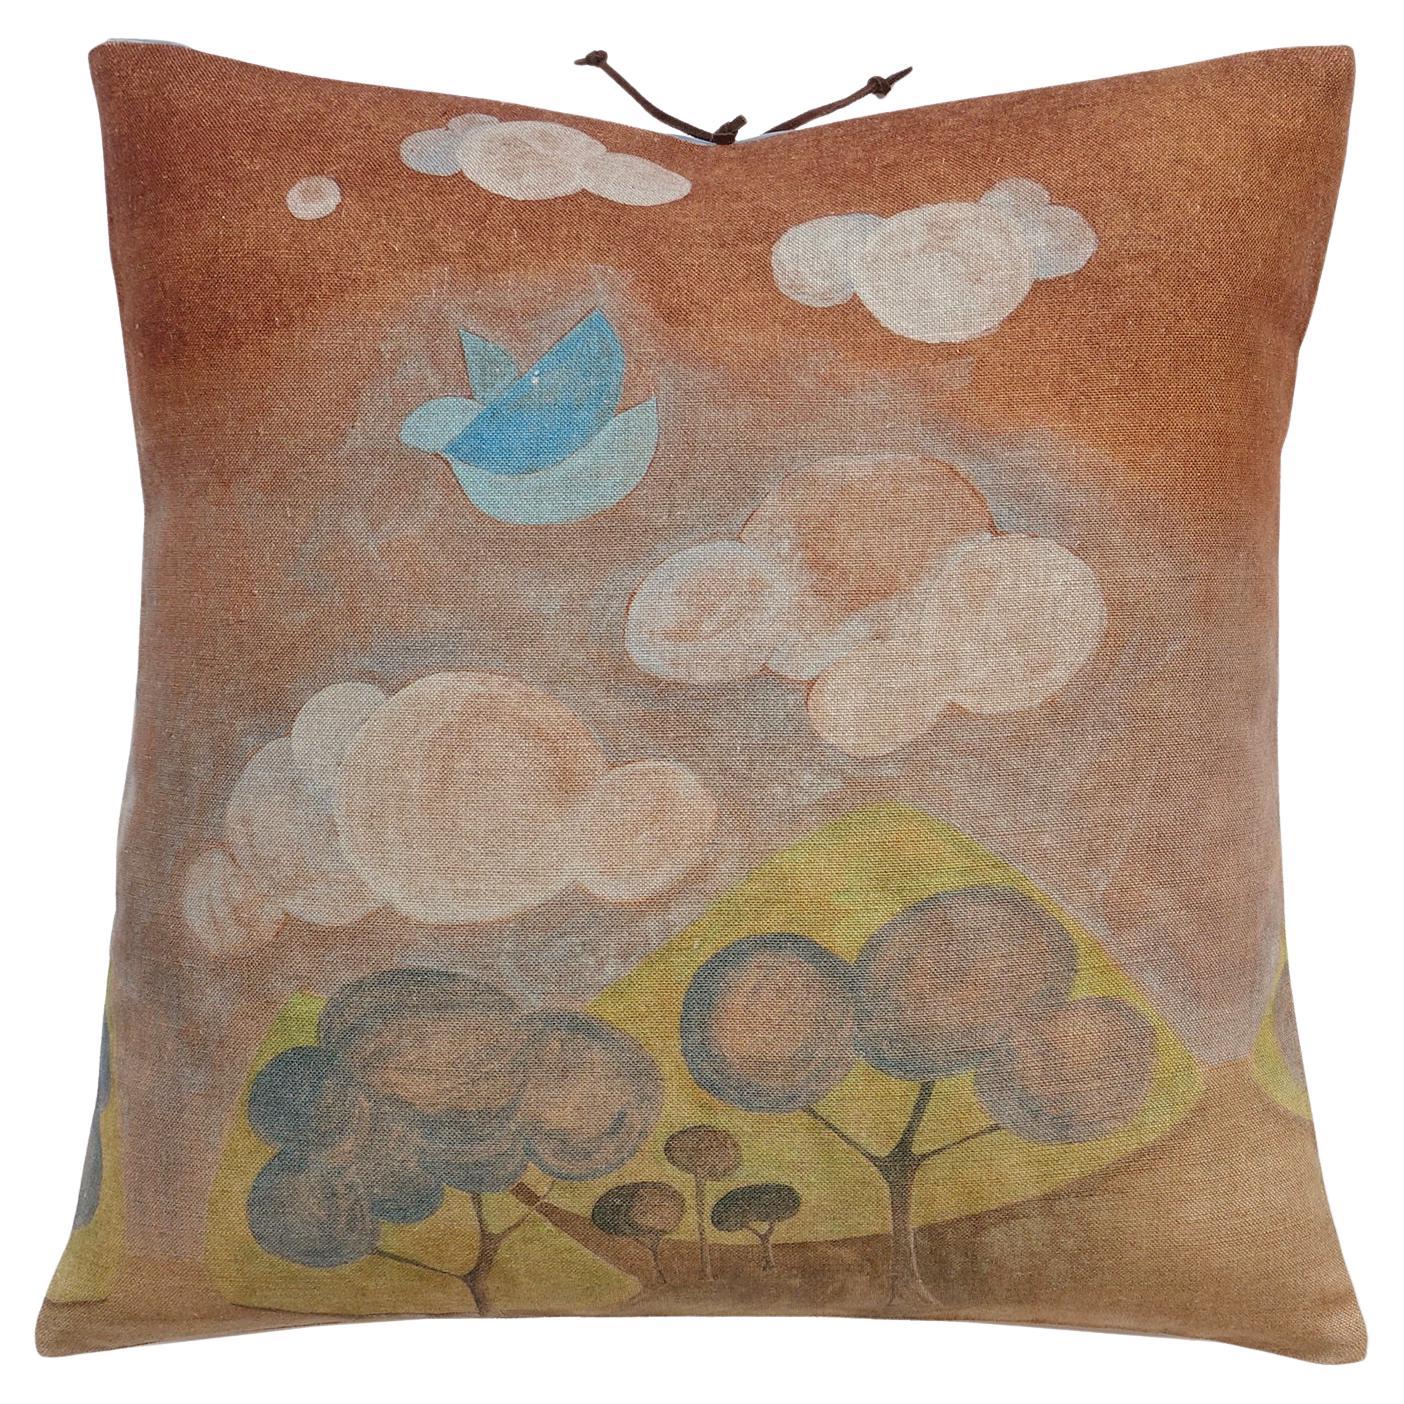 Printed Linen Pillow Happy Place Flax